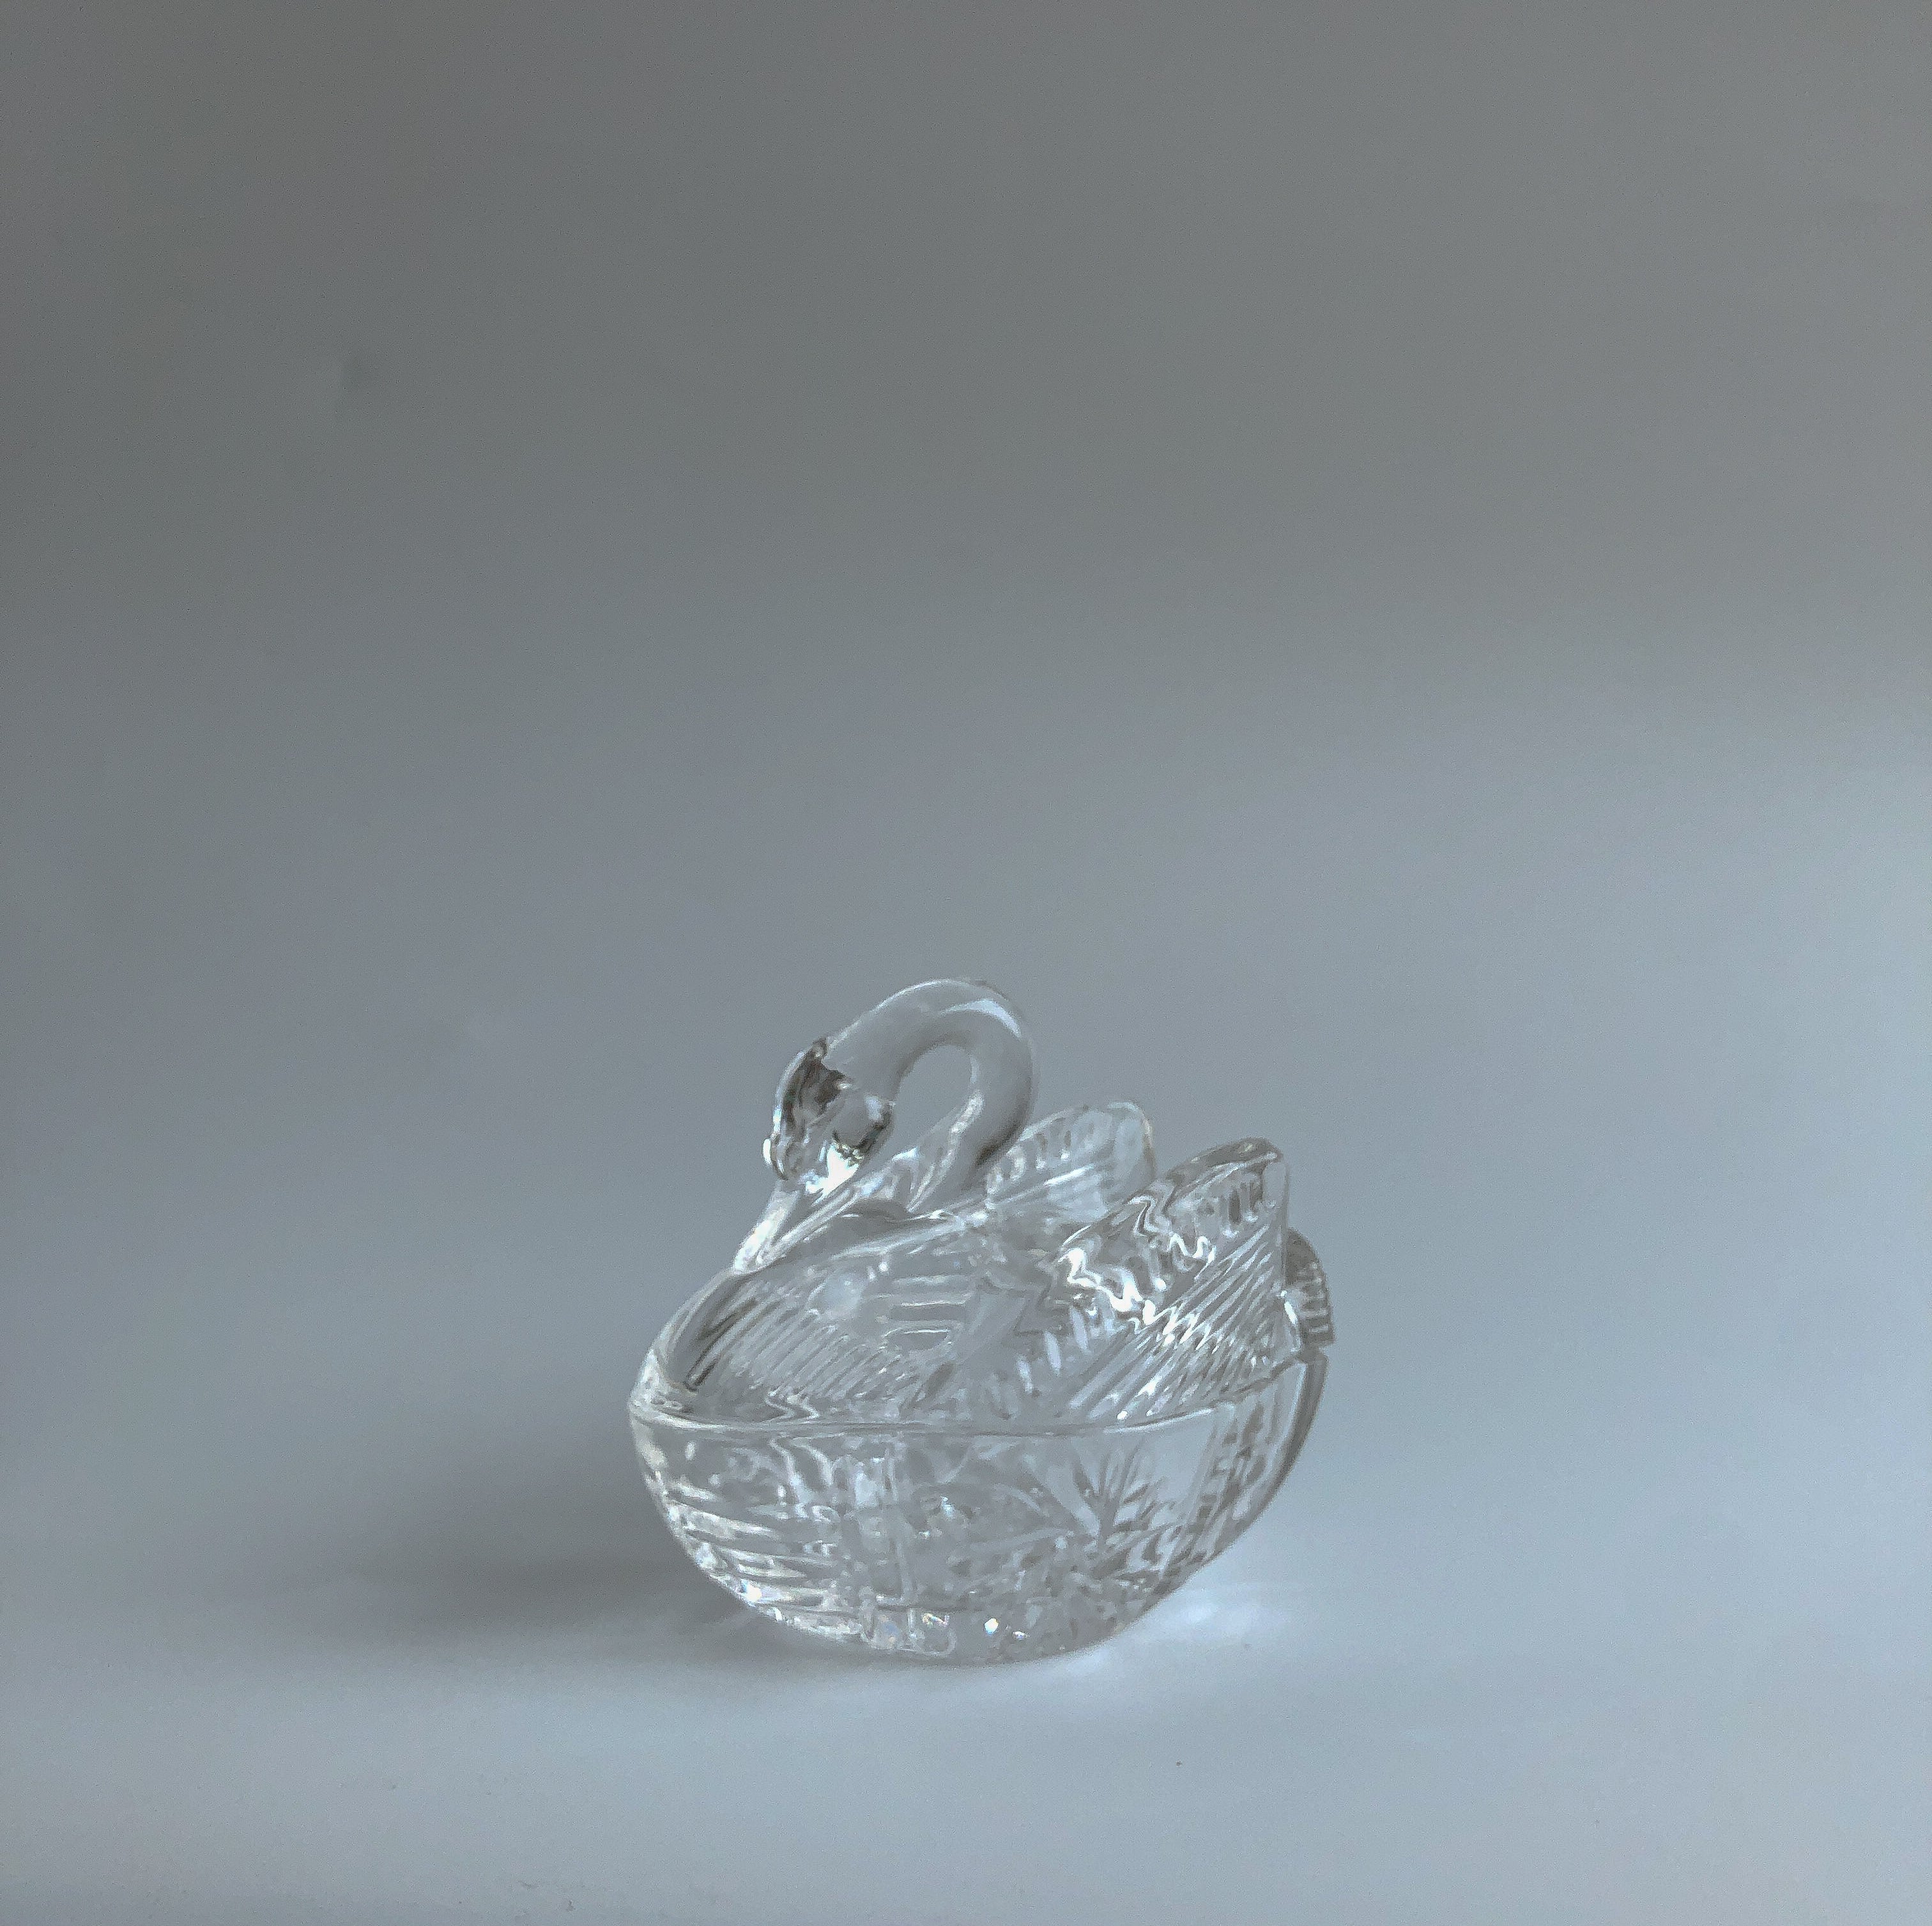 Vintage Swan Butter Dish by PROSE Tabletop